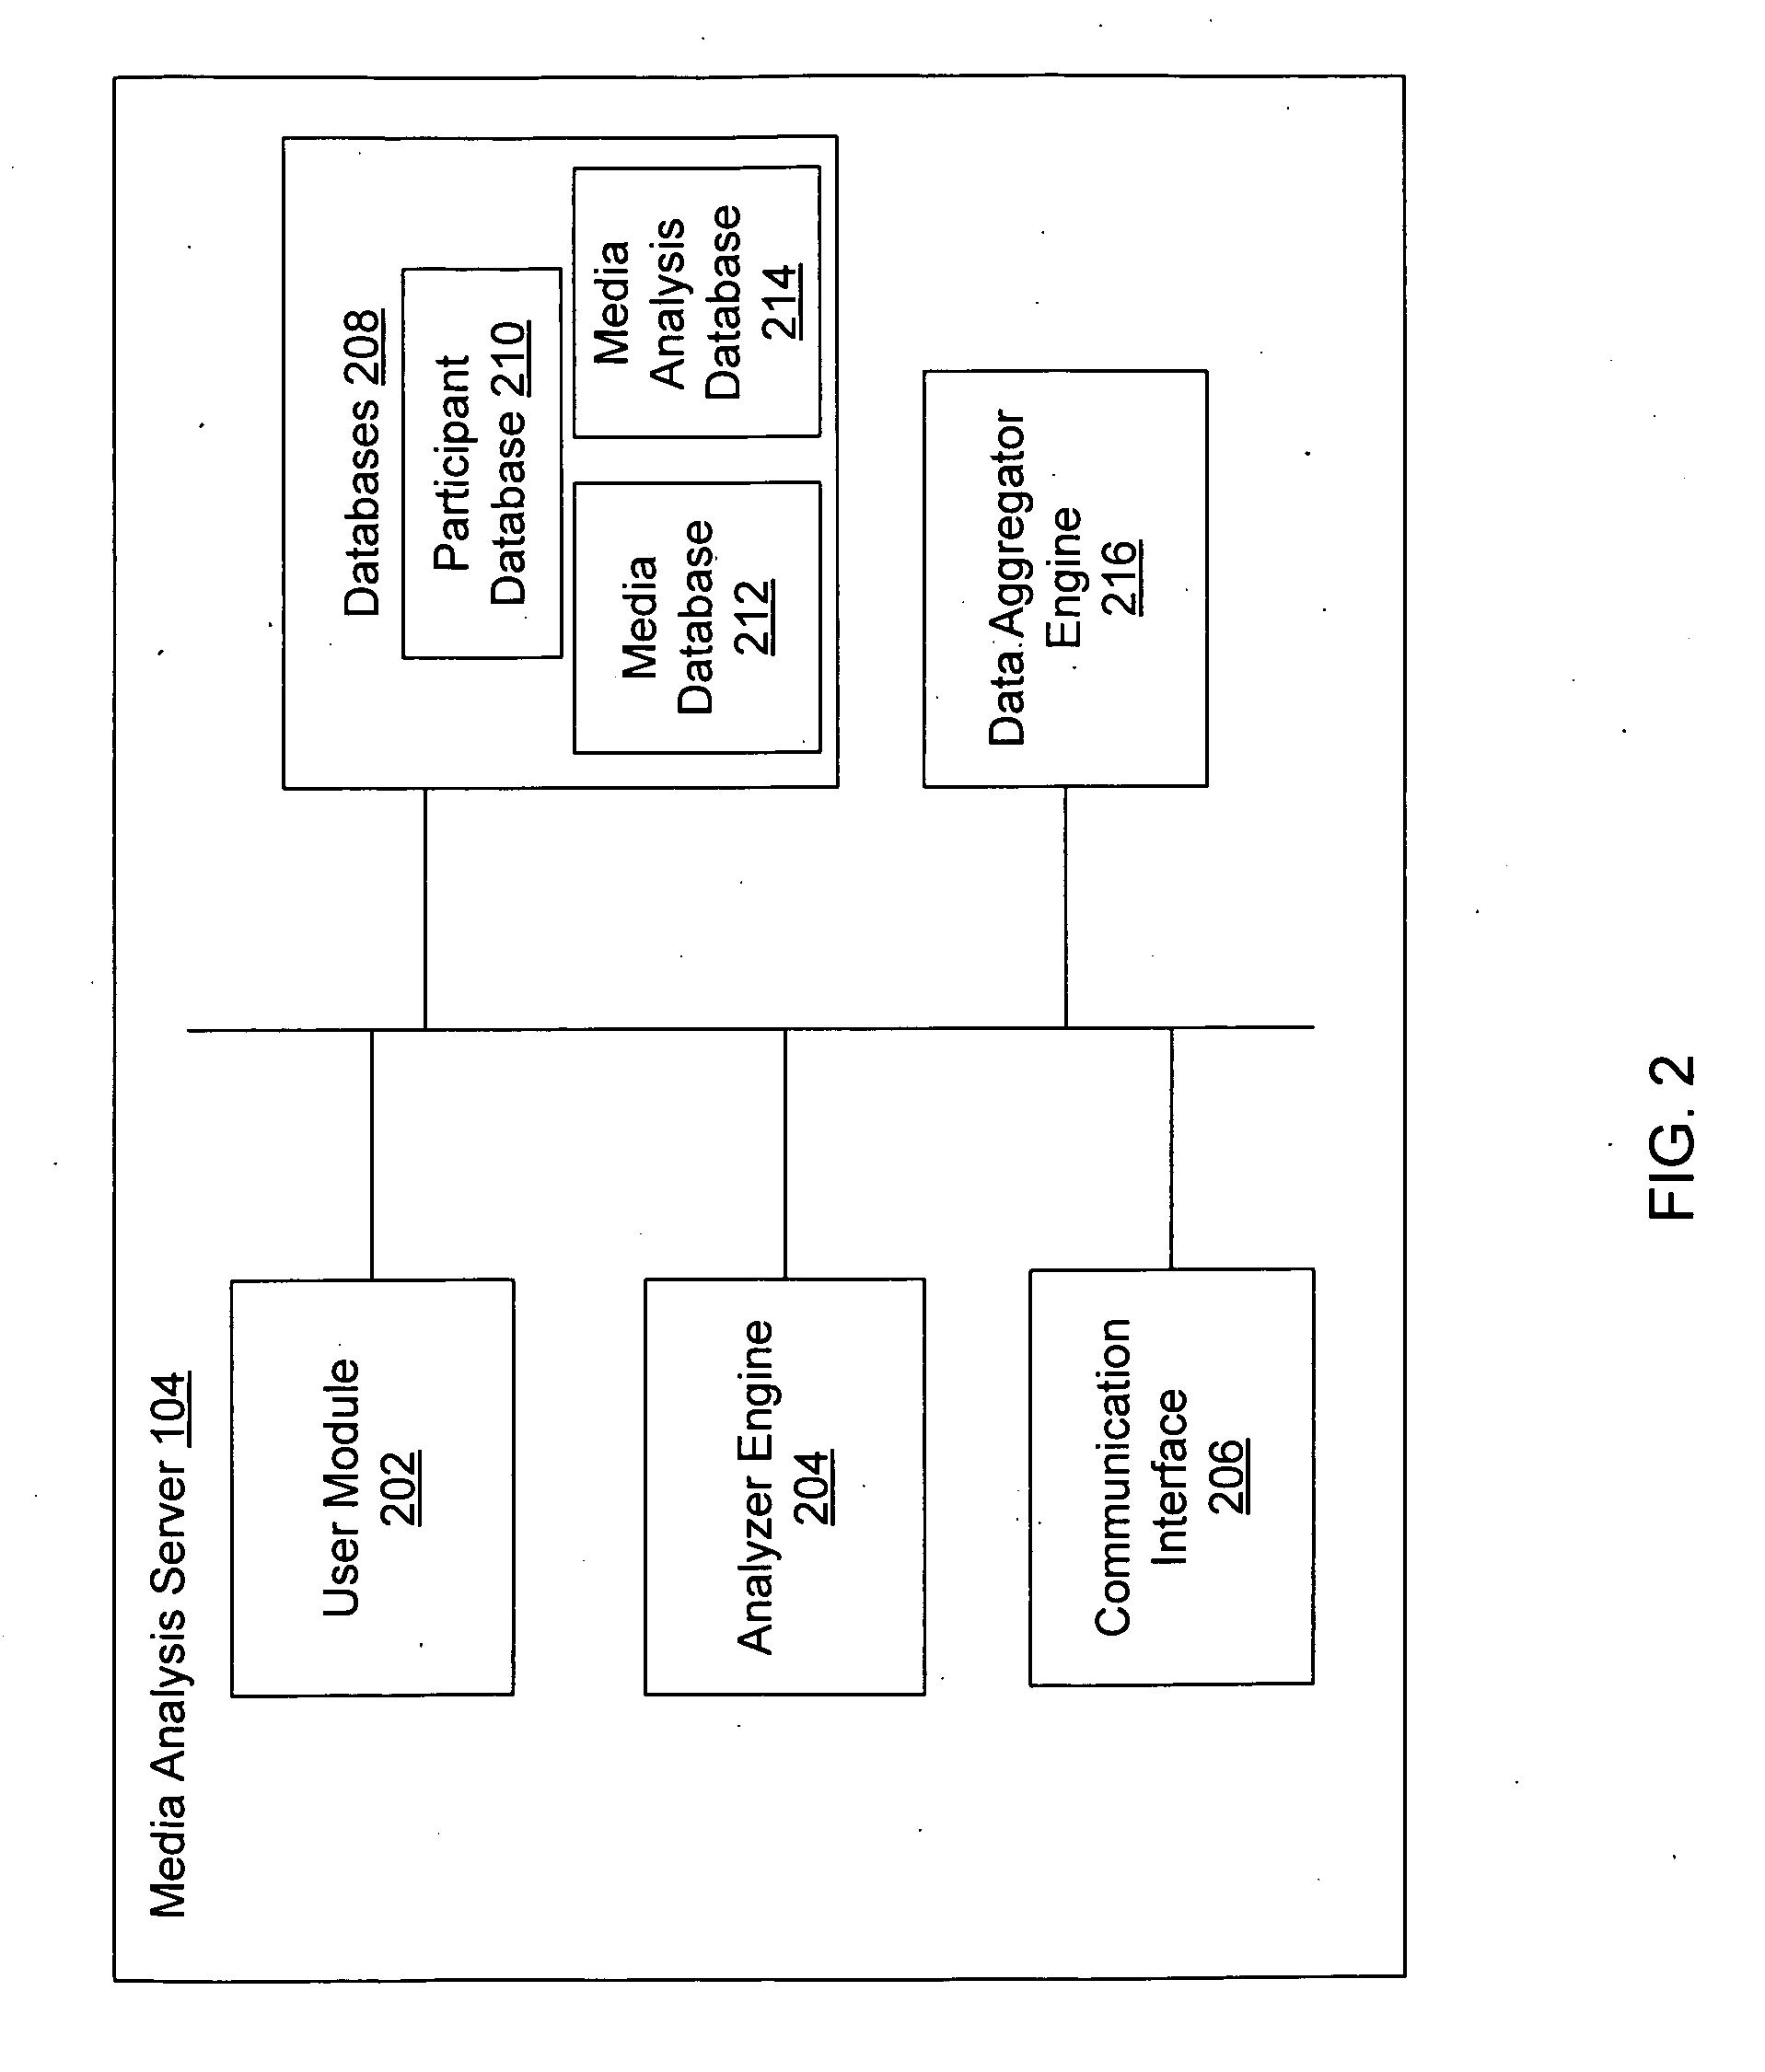 Method and system for providing multi-dimensional feedback